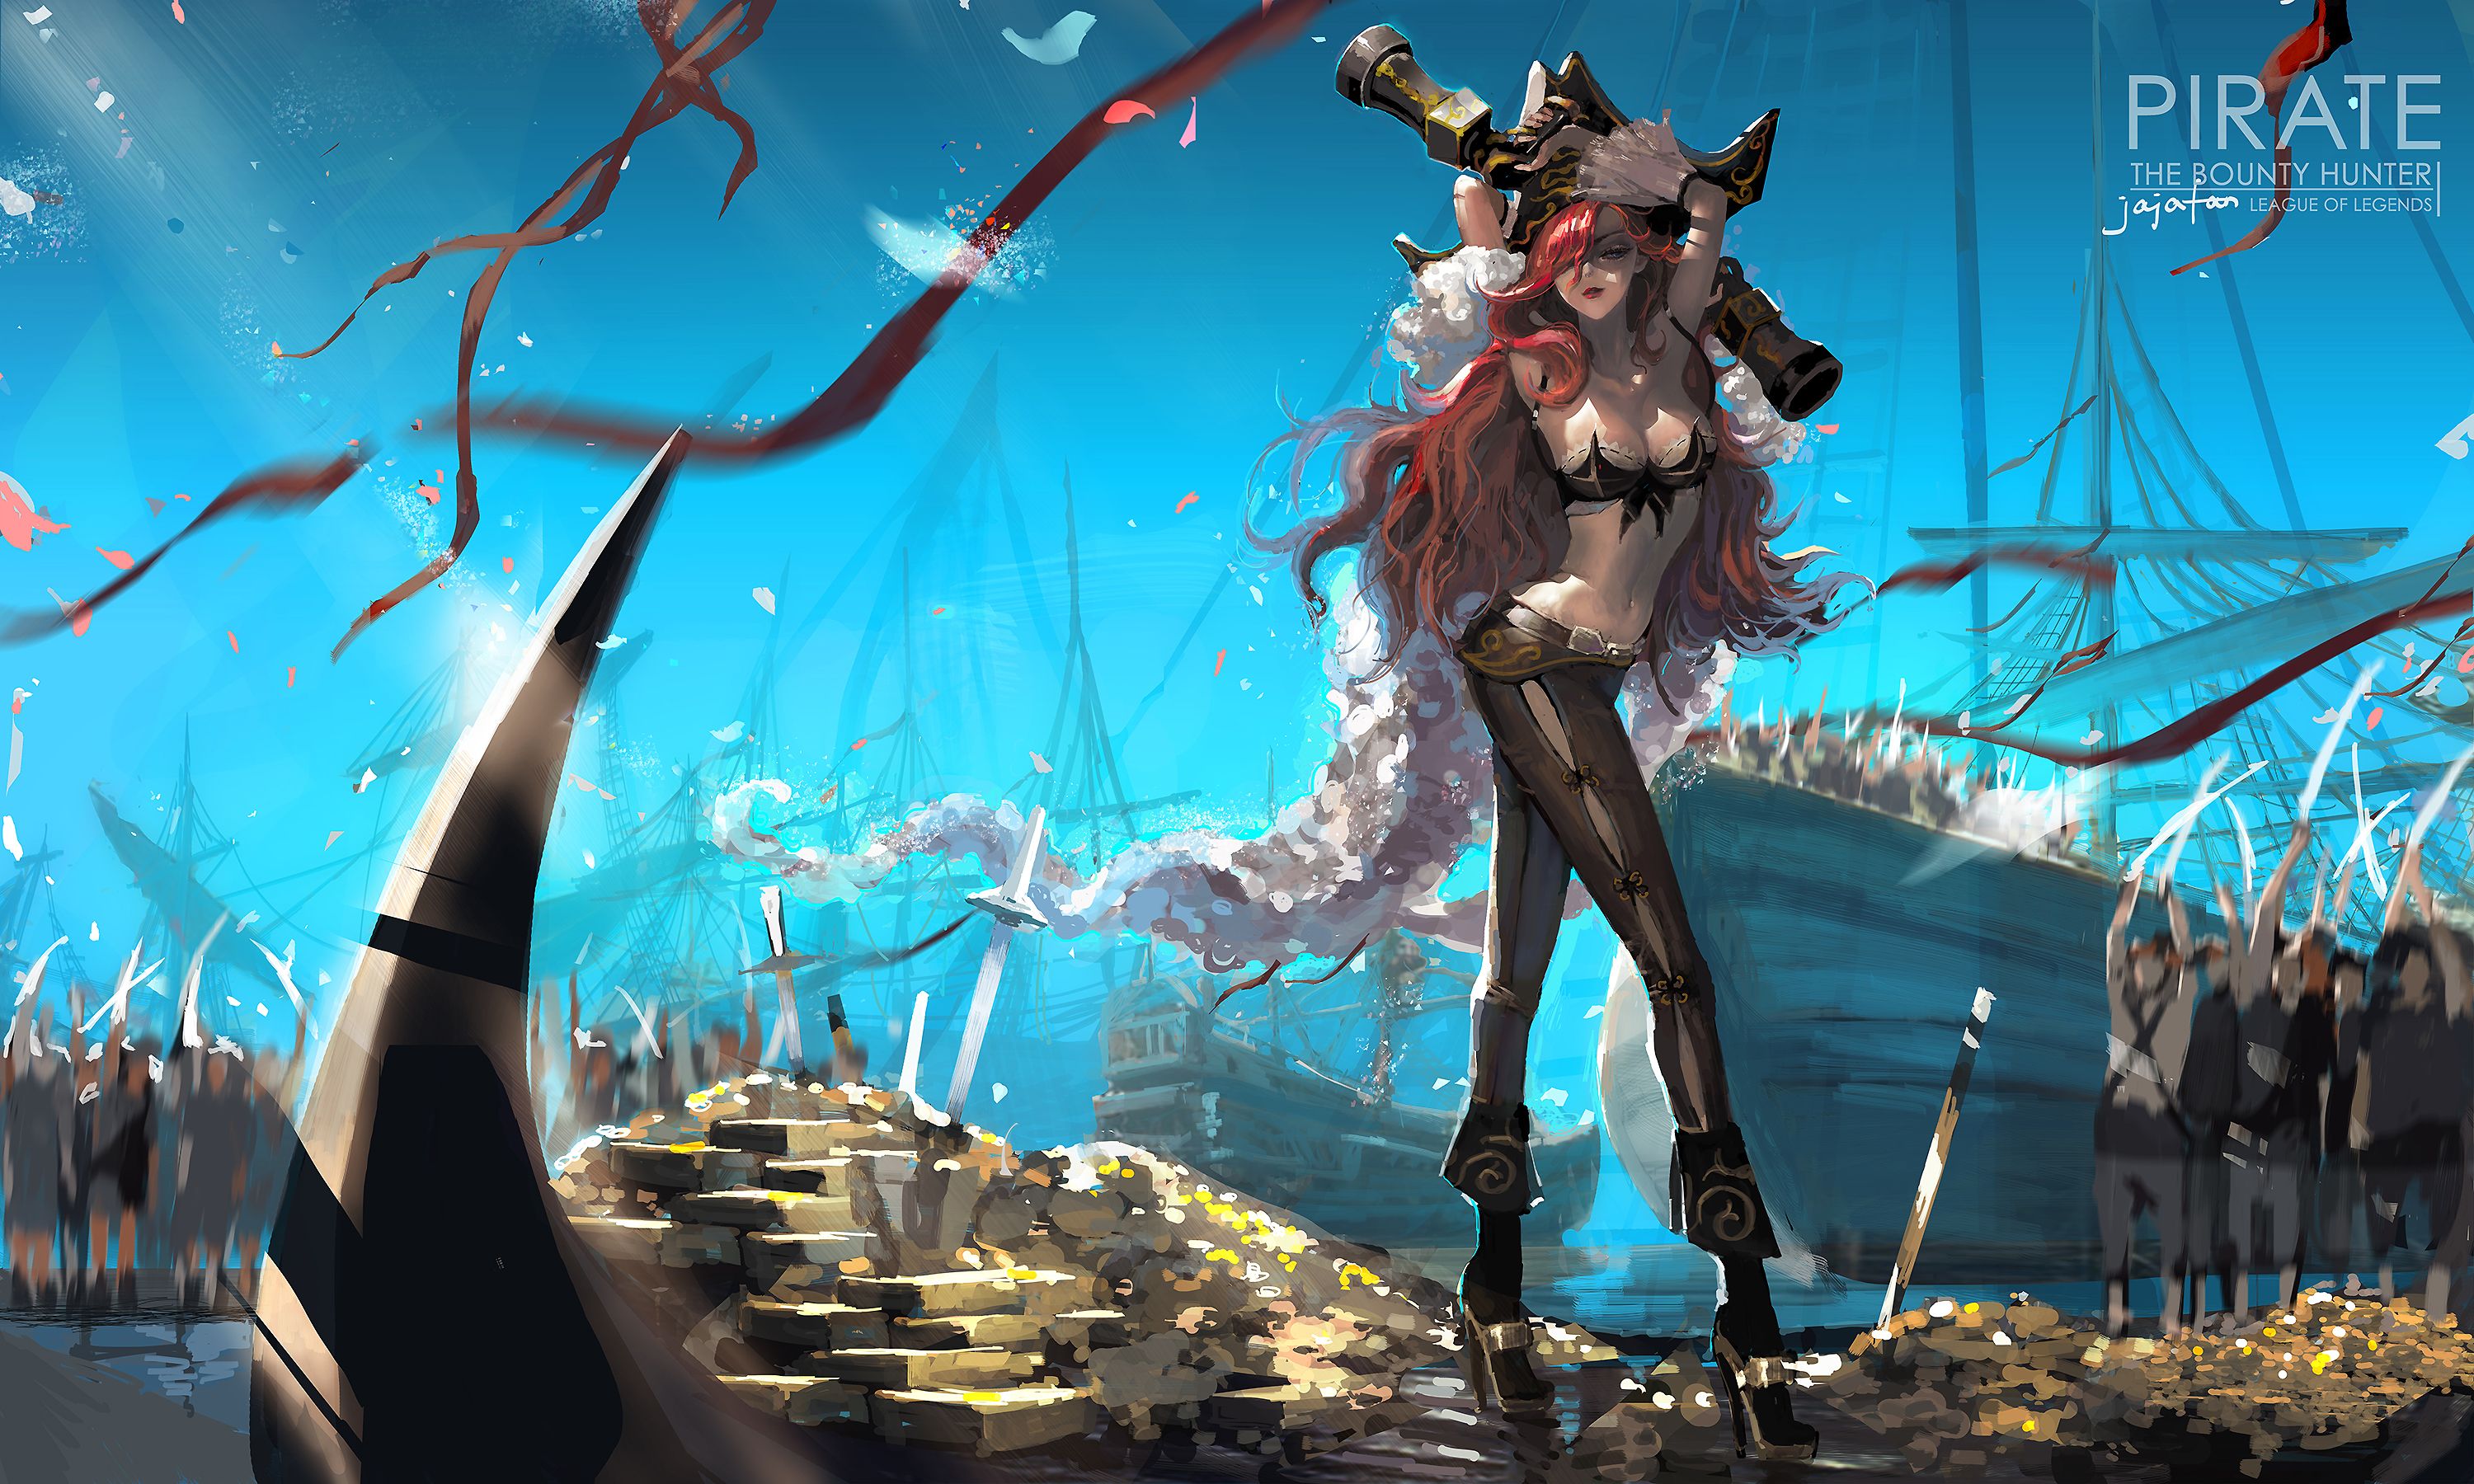 A beautiful anime girl with a sword in her hands, standing on a pile of gold and treasure, with a ship in the background - Pirate